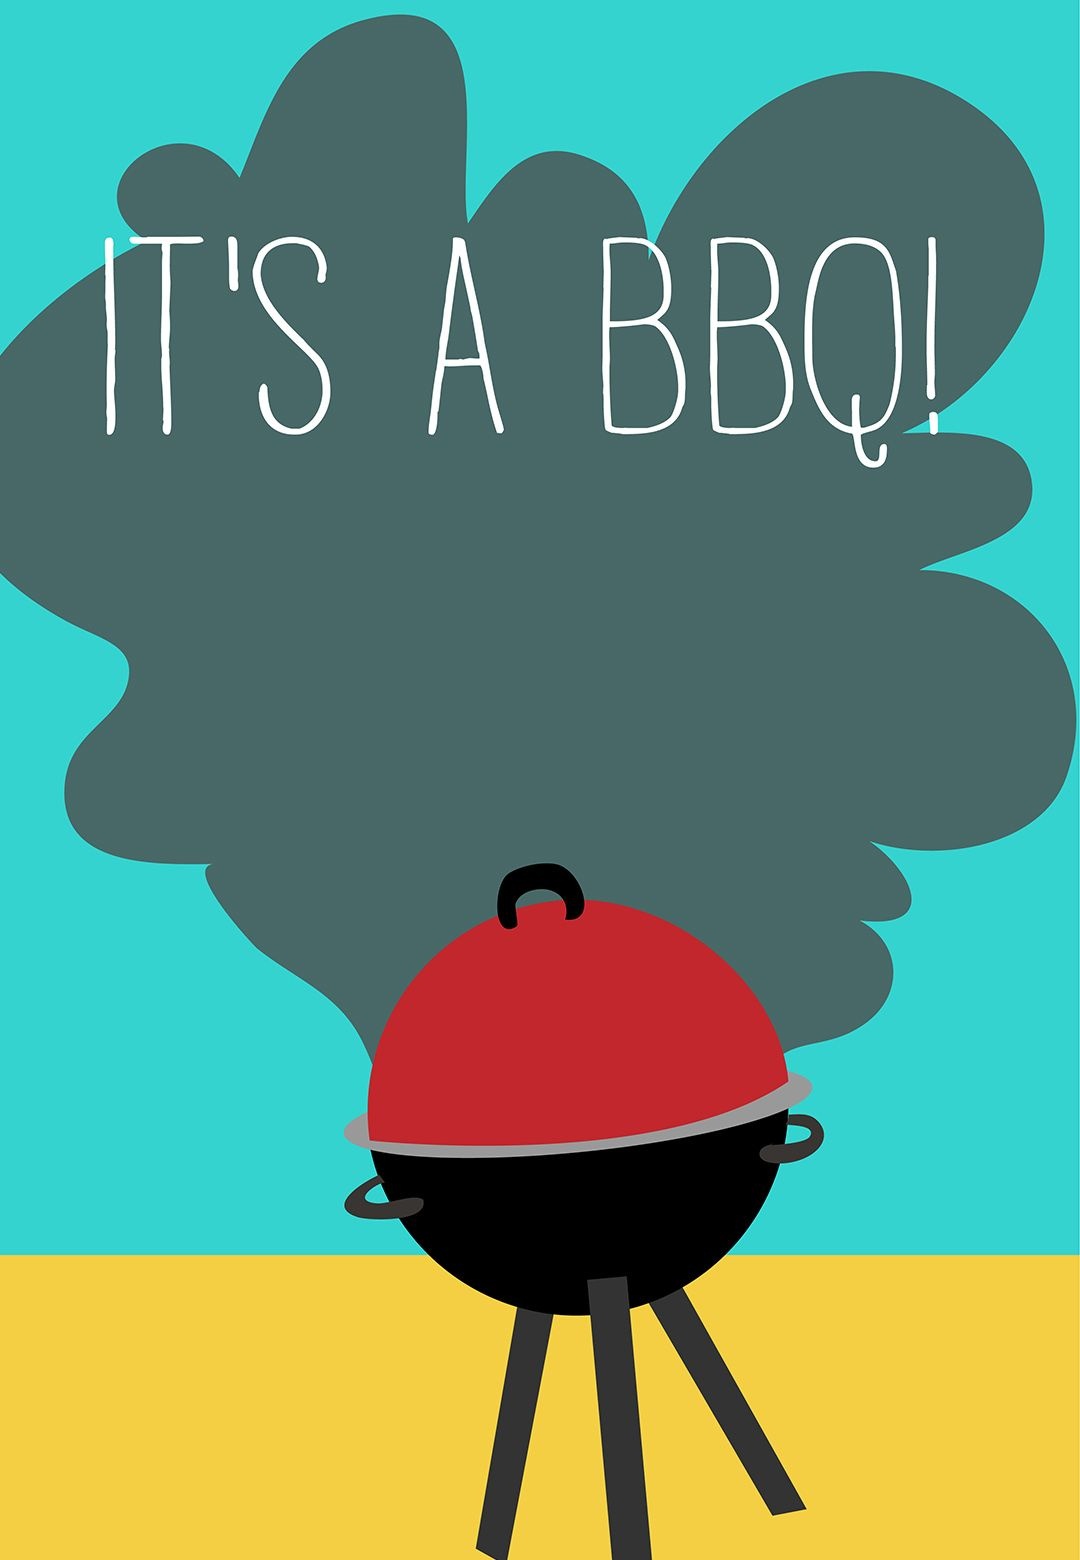 4Th Of July Bbq Party Invitation - Free Printable | Summer Grillin - Free Printable Cookout Invitations